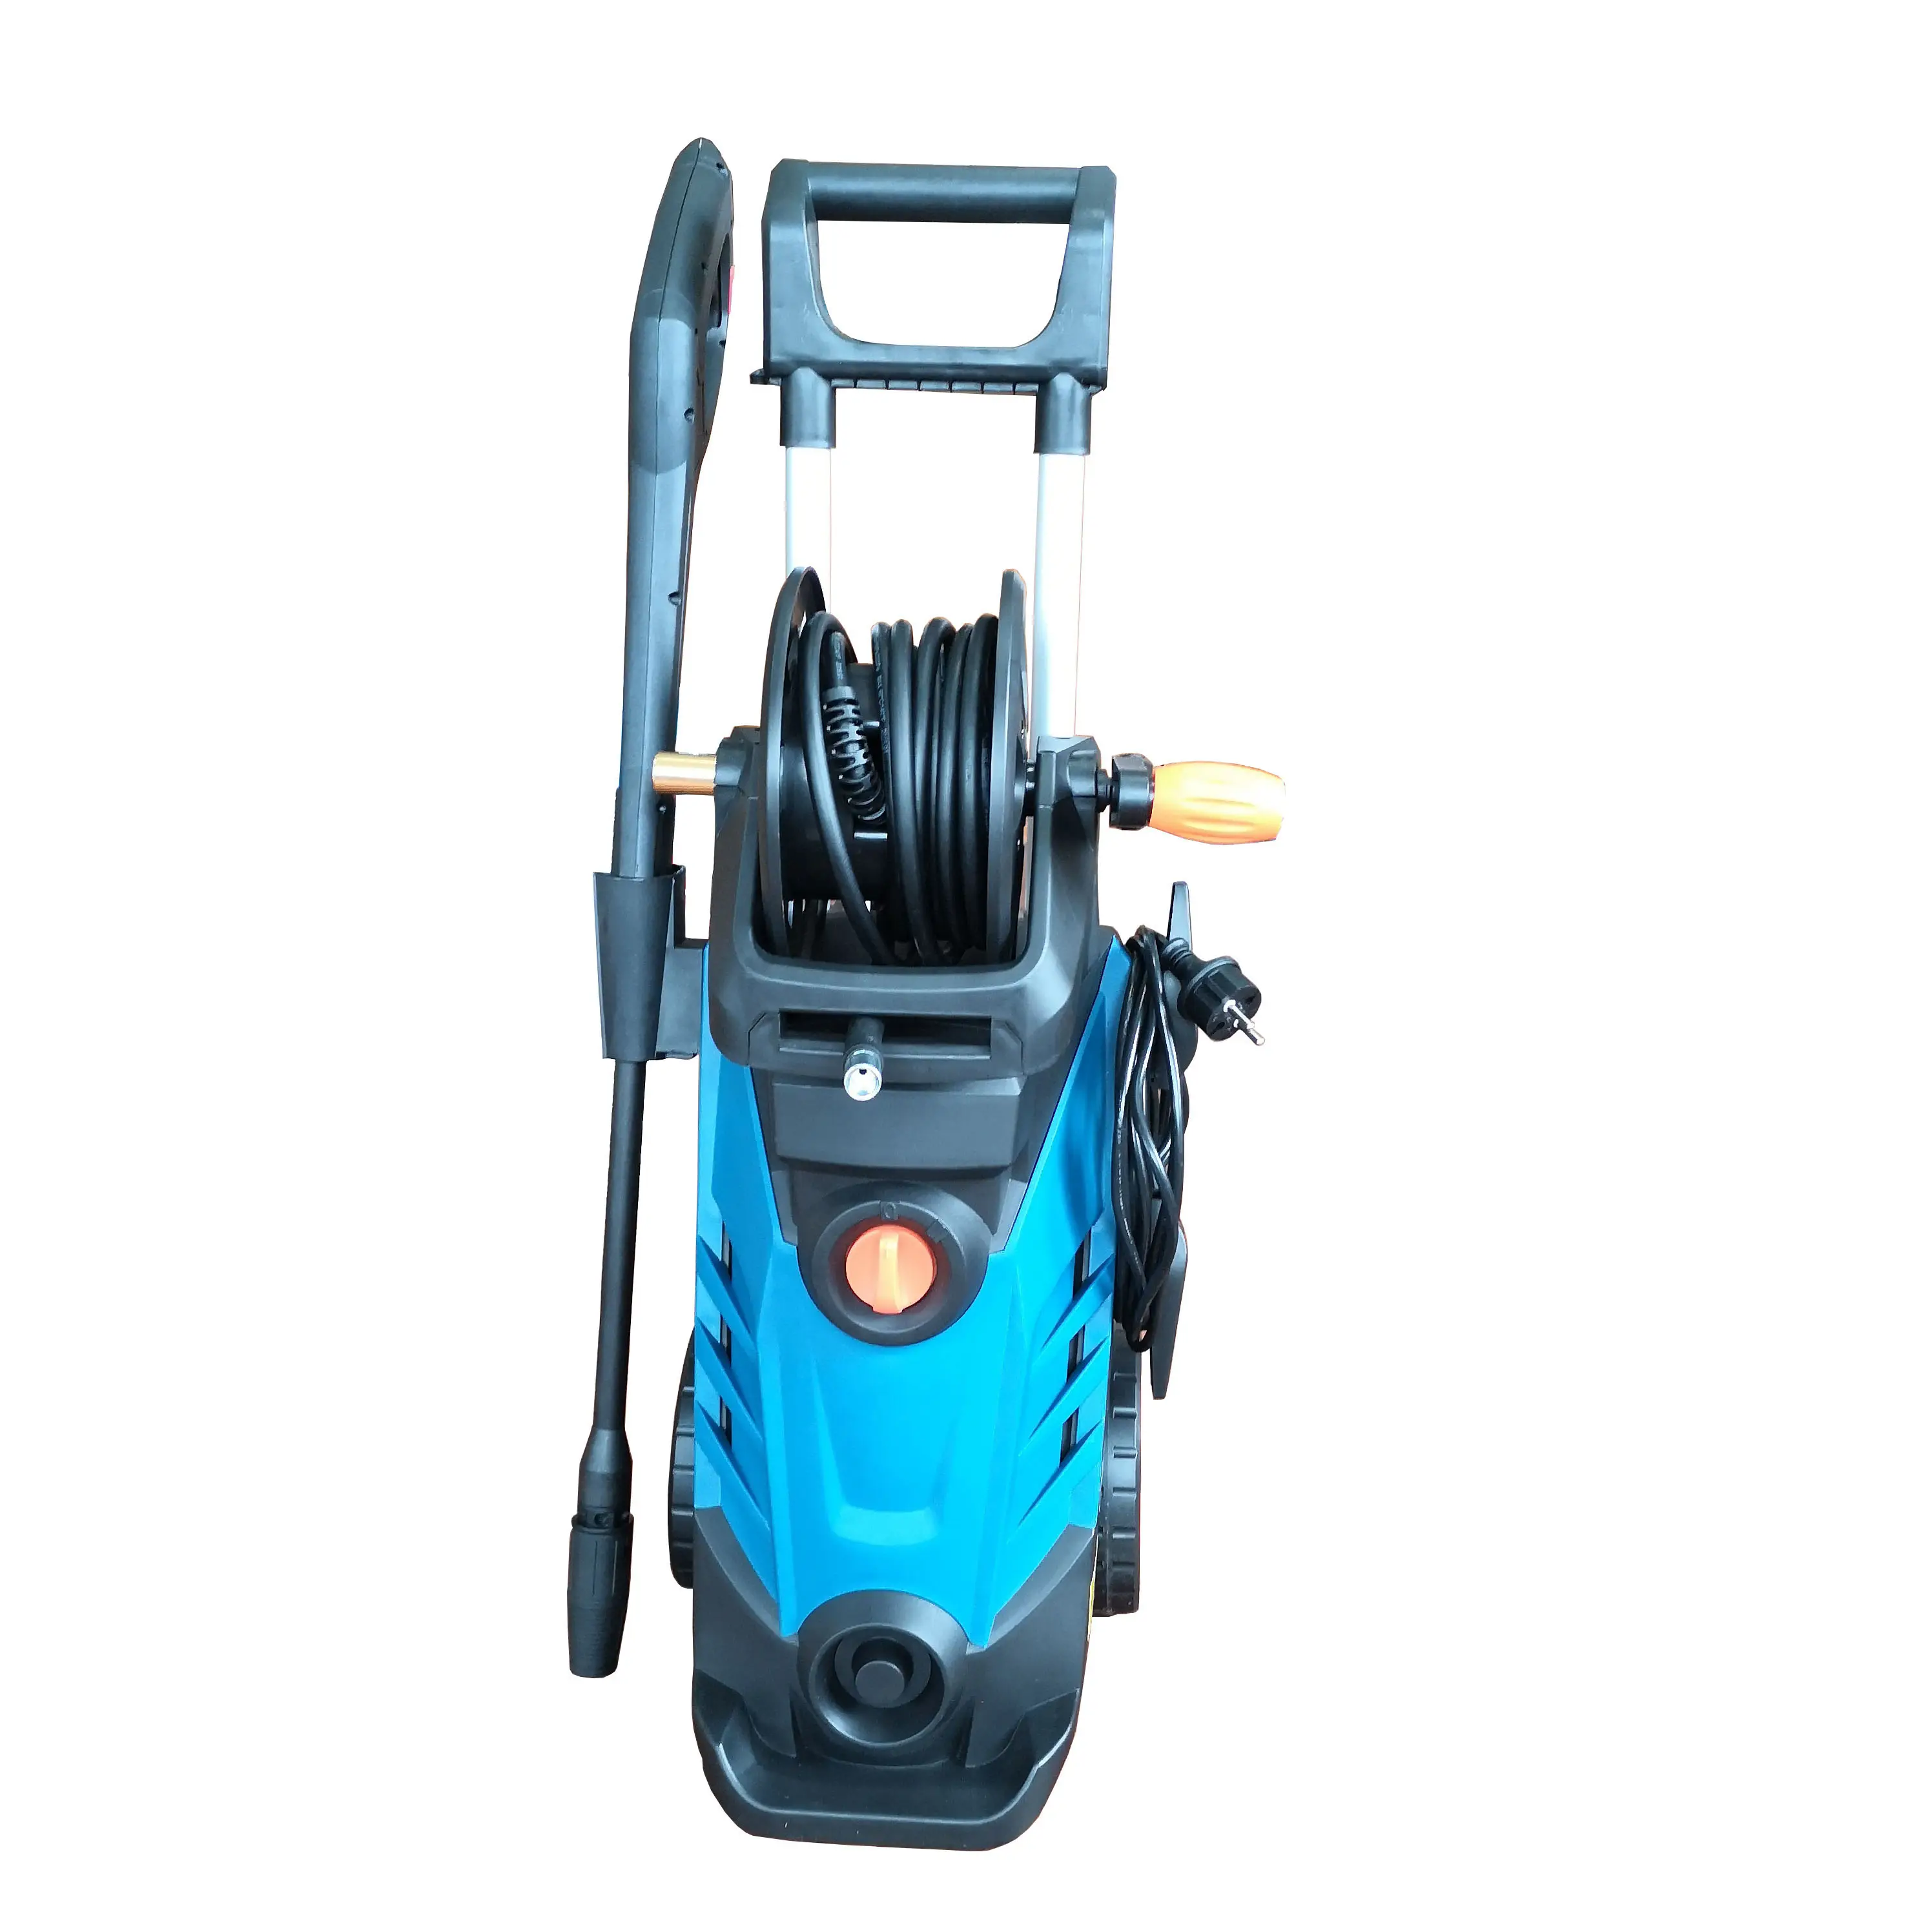 1.8KW Strong Power high pressure washer air compressor pressure washer